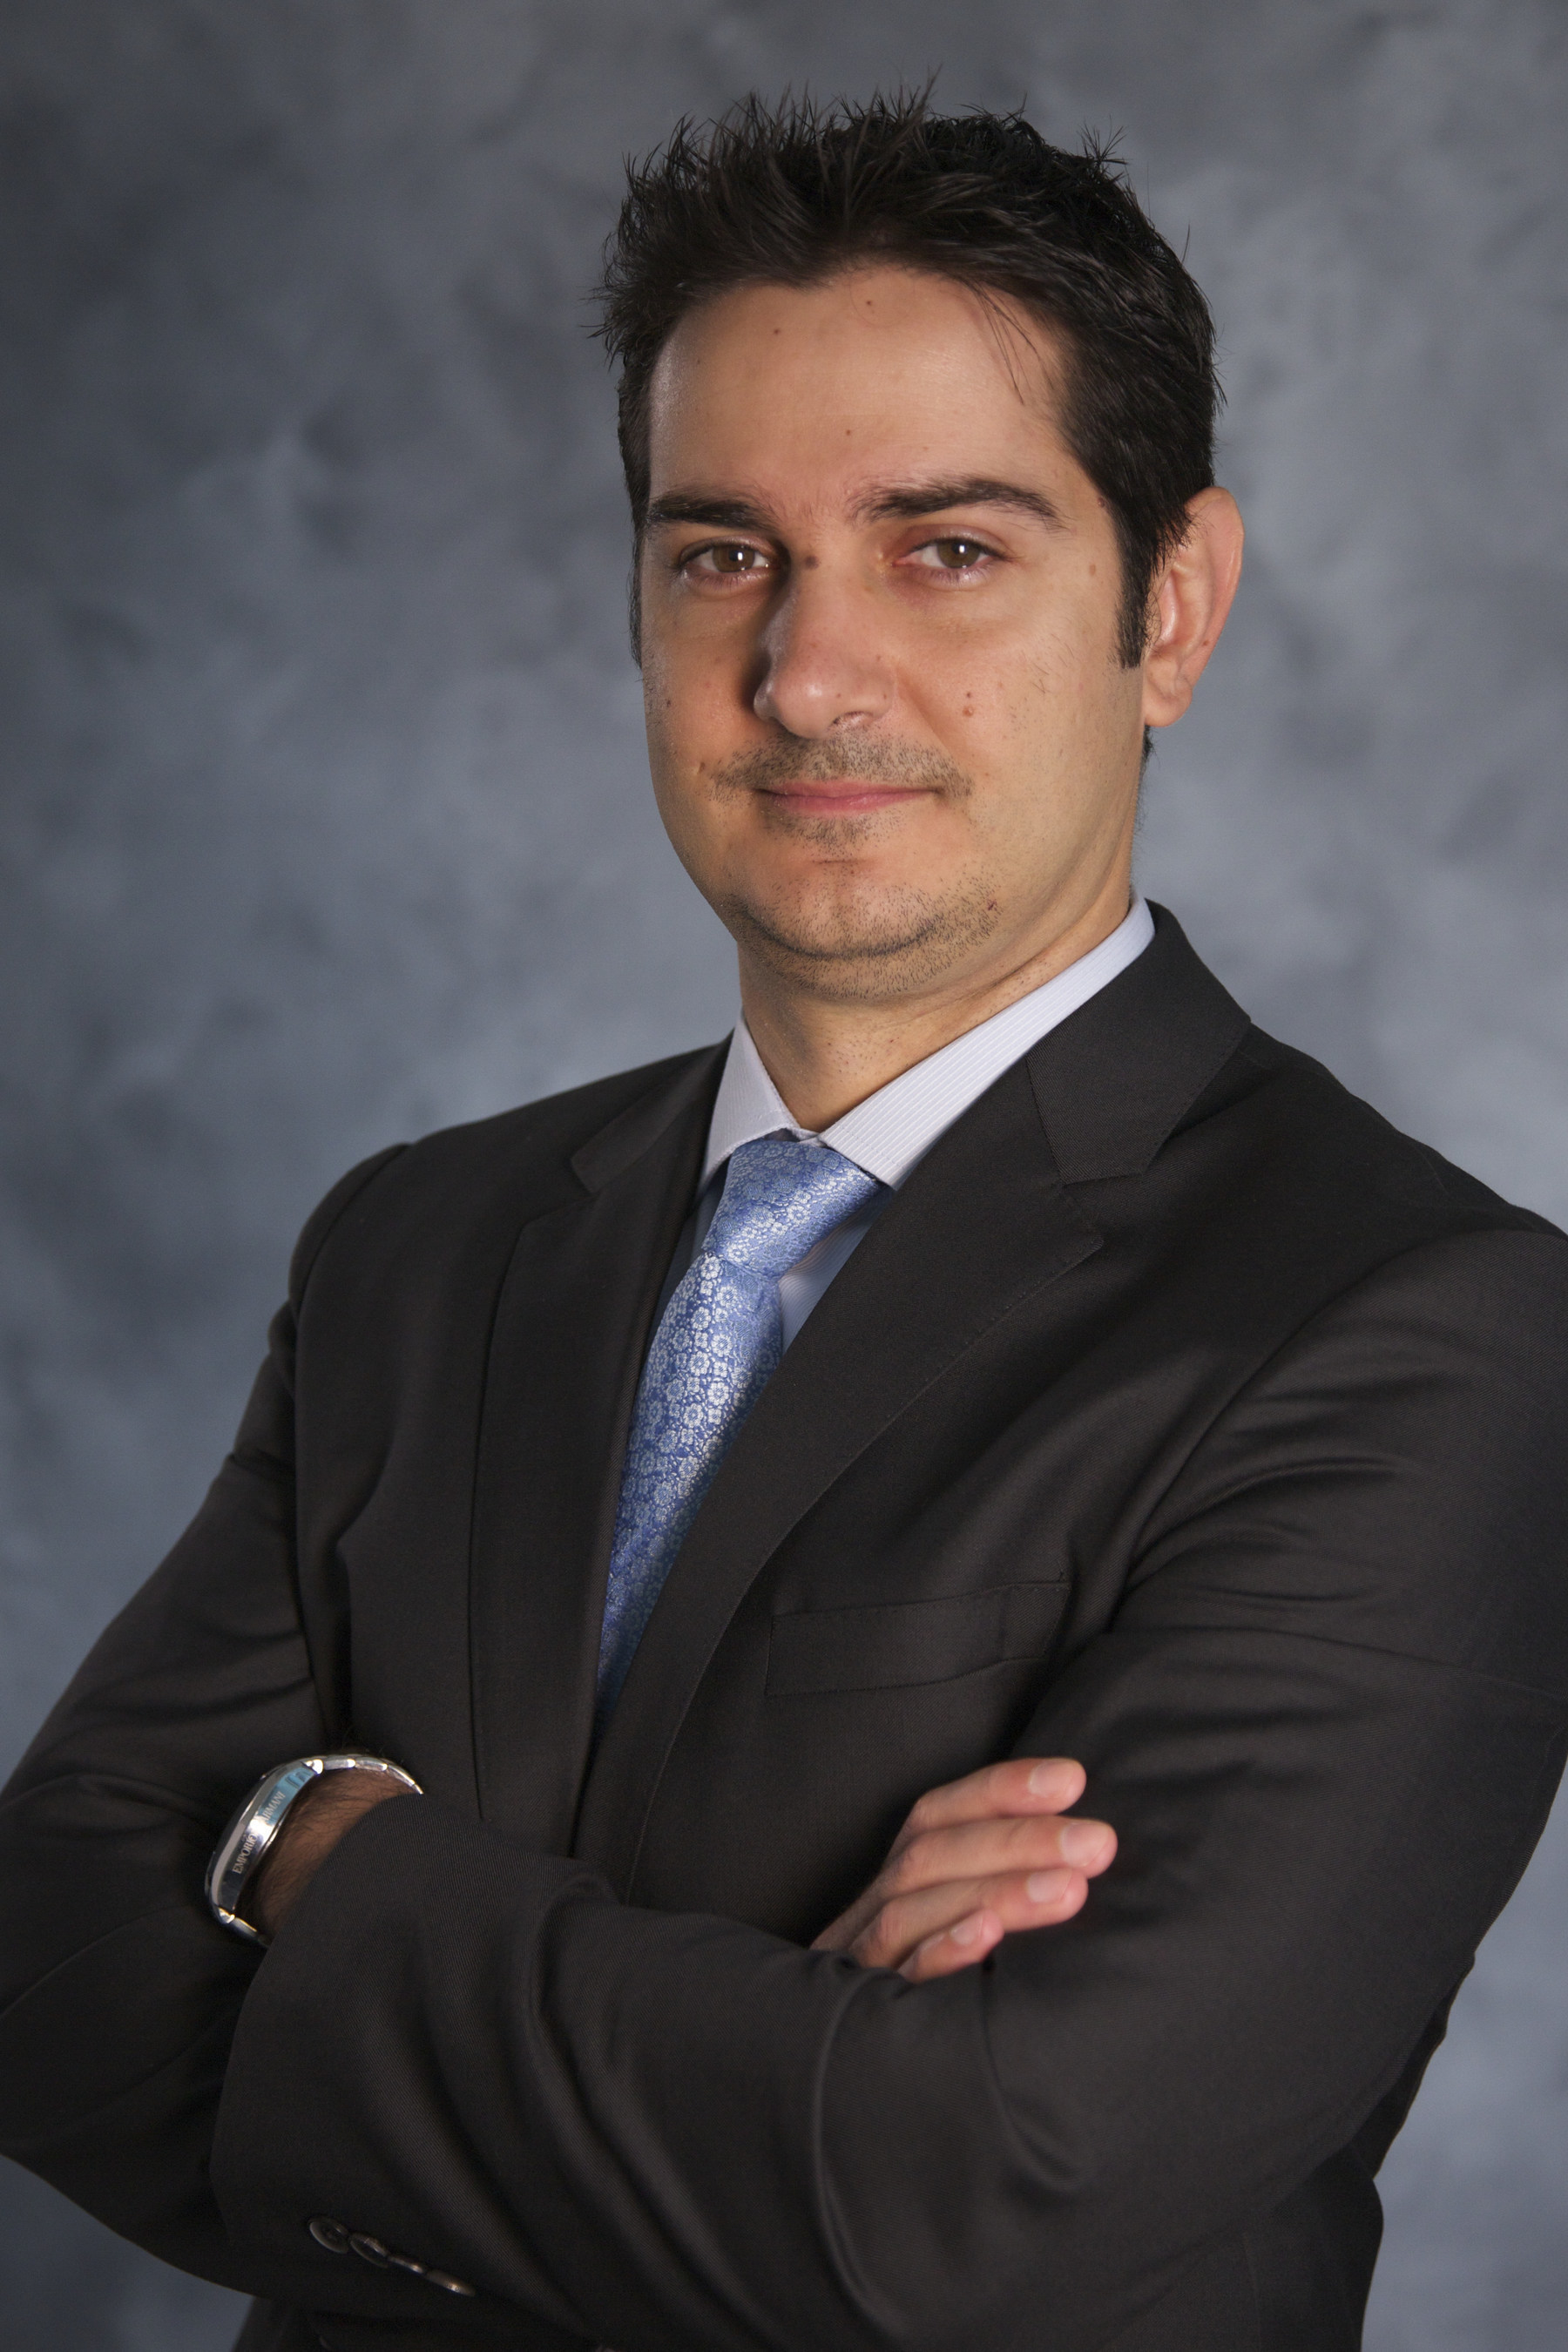 Cypress CEO and President Hassane El-Khoury